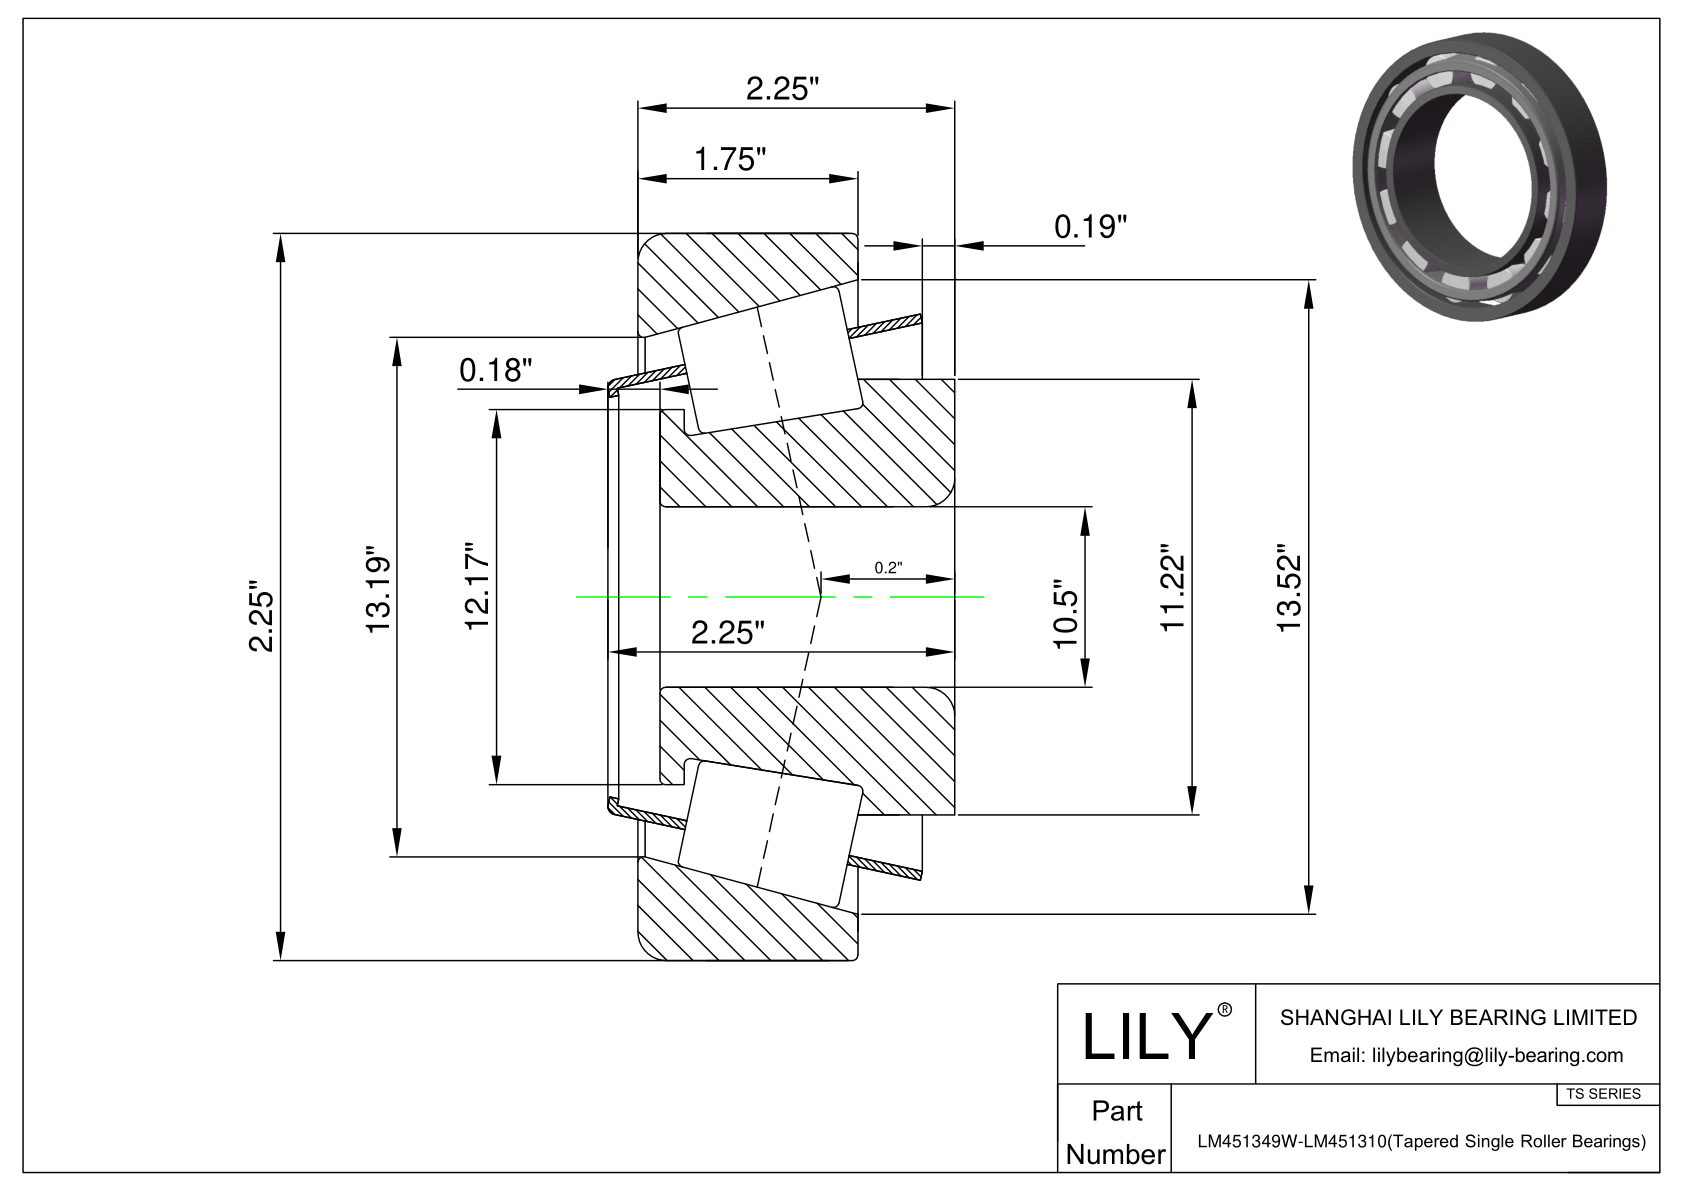 LM451349W-LM451310 TS (Tapered Single Roller Bearings) (Imperial) cad drawing